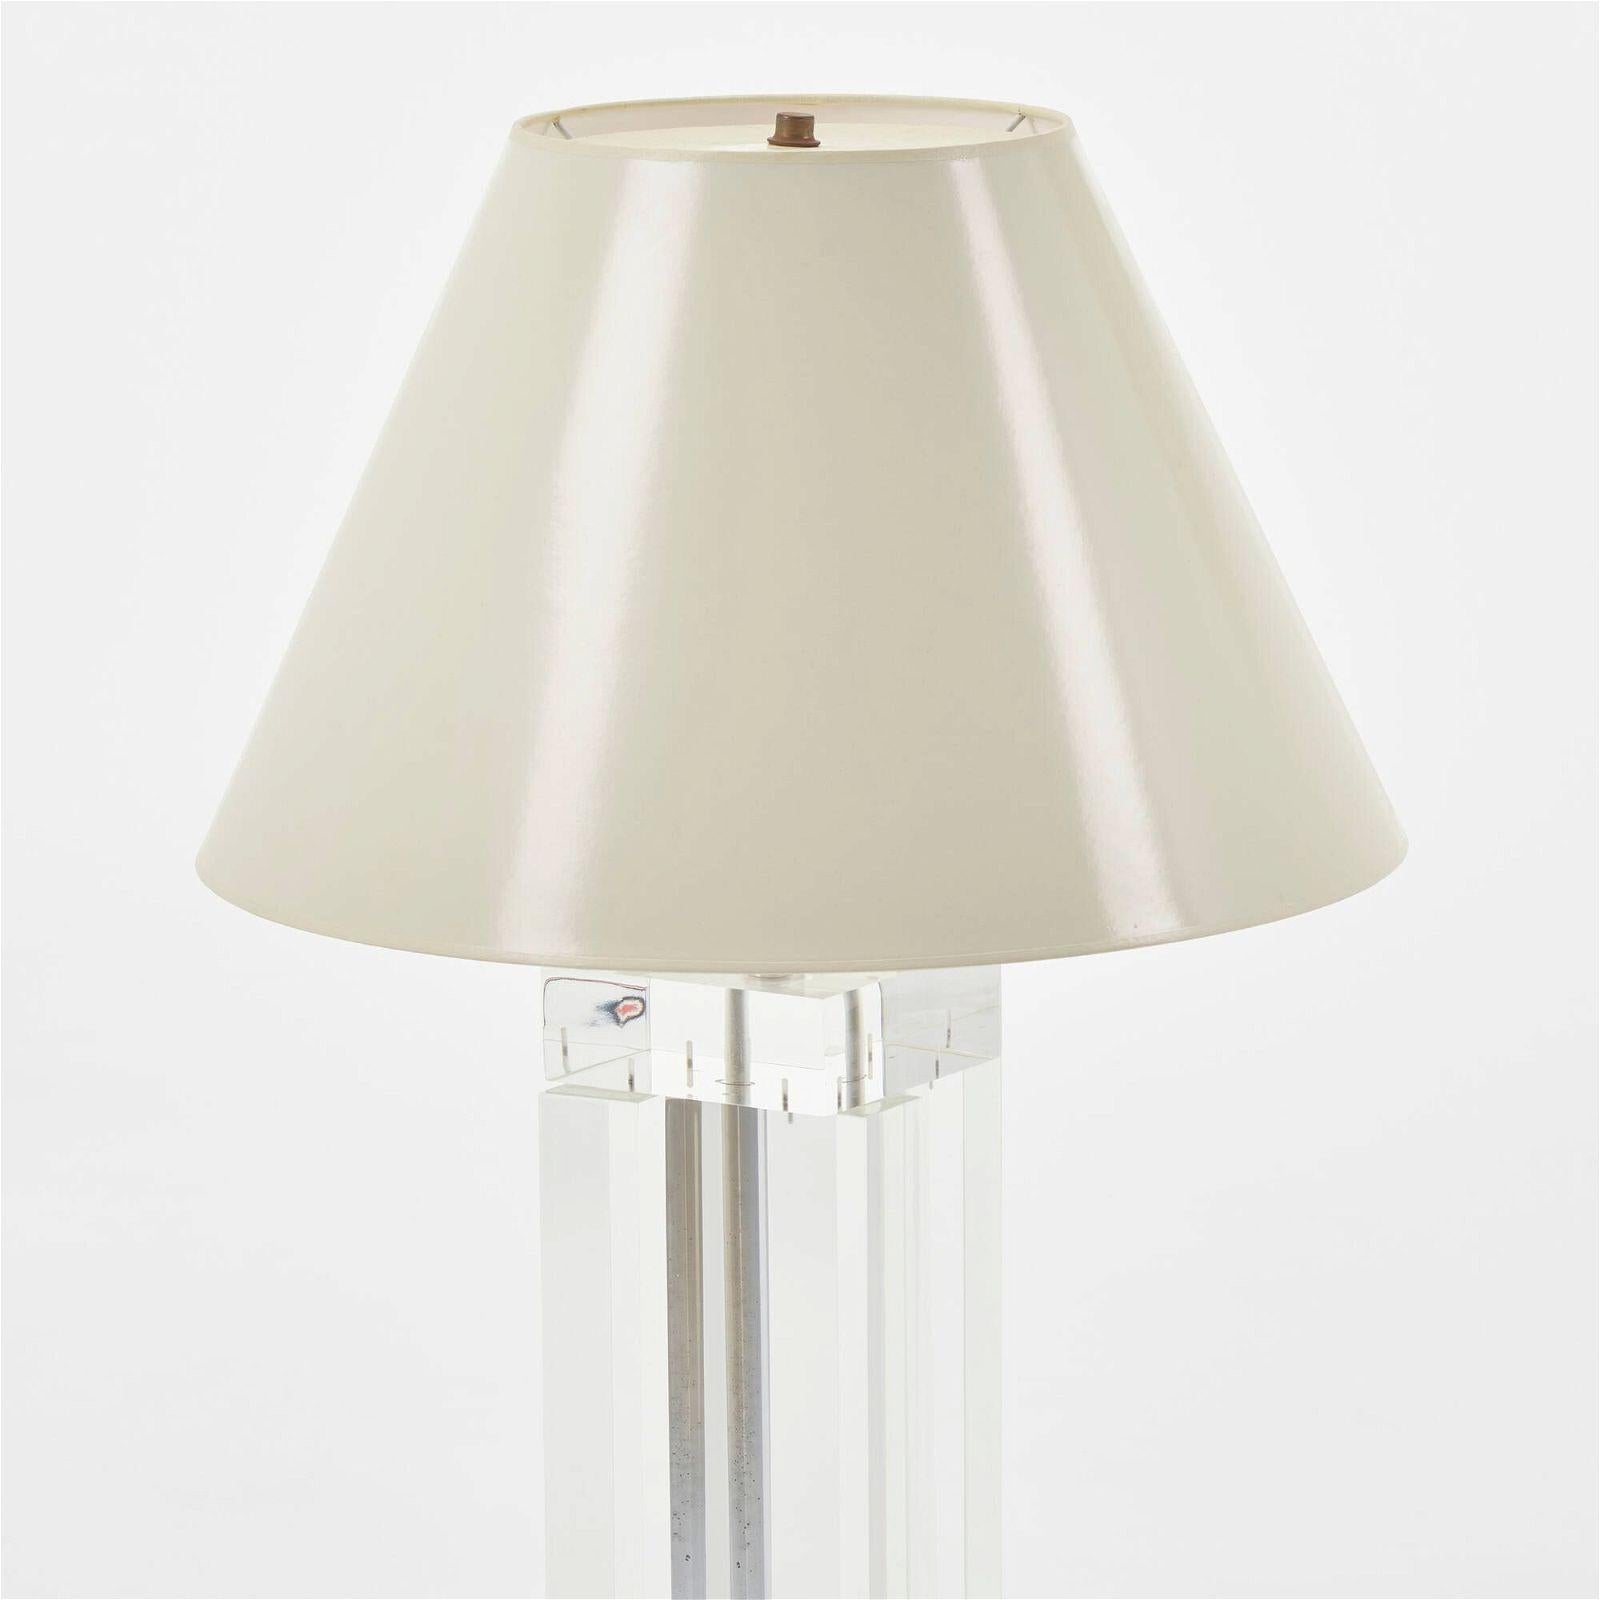 Mid-Century Modern Pair of Lucite Table Lamps attb to 